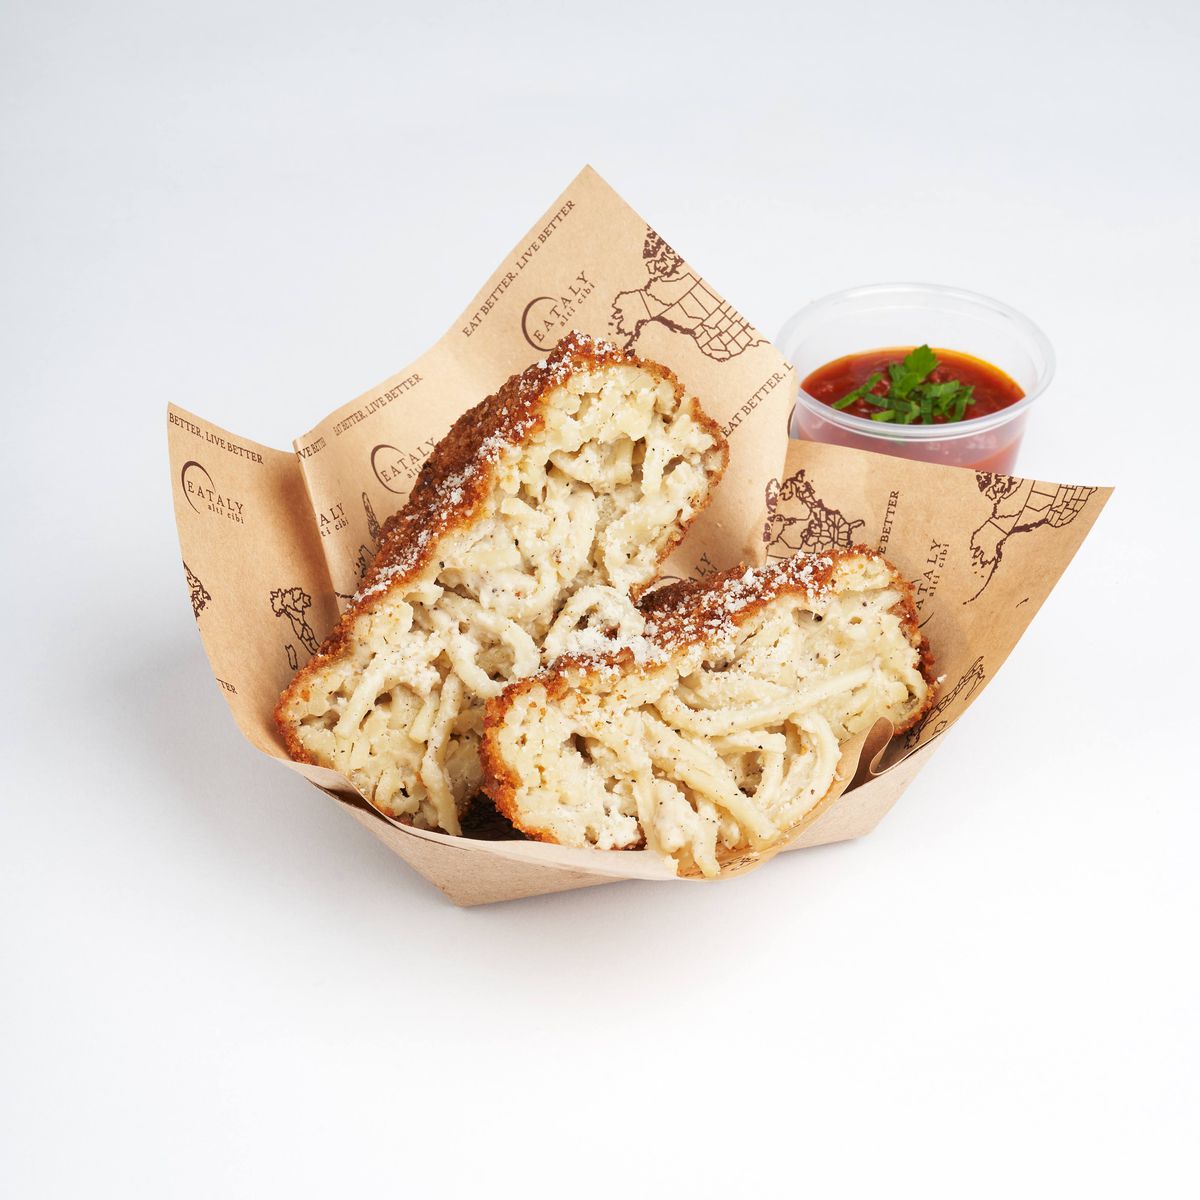 A cardboard boat holds fried and breaded cacio e pepe. Behind it to the right is a plastic container of tomato dipping sauce.